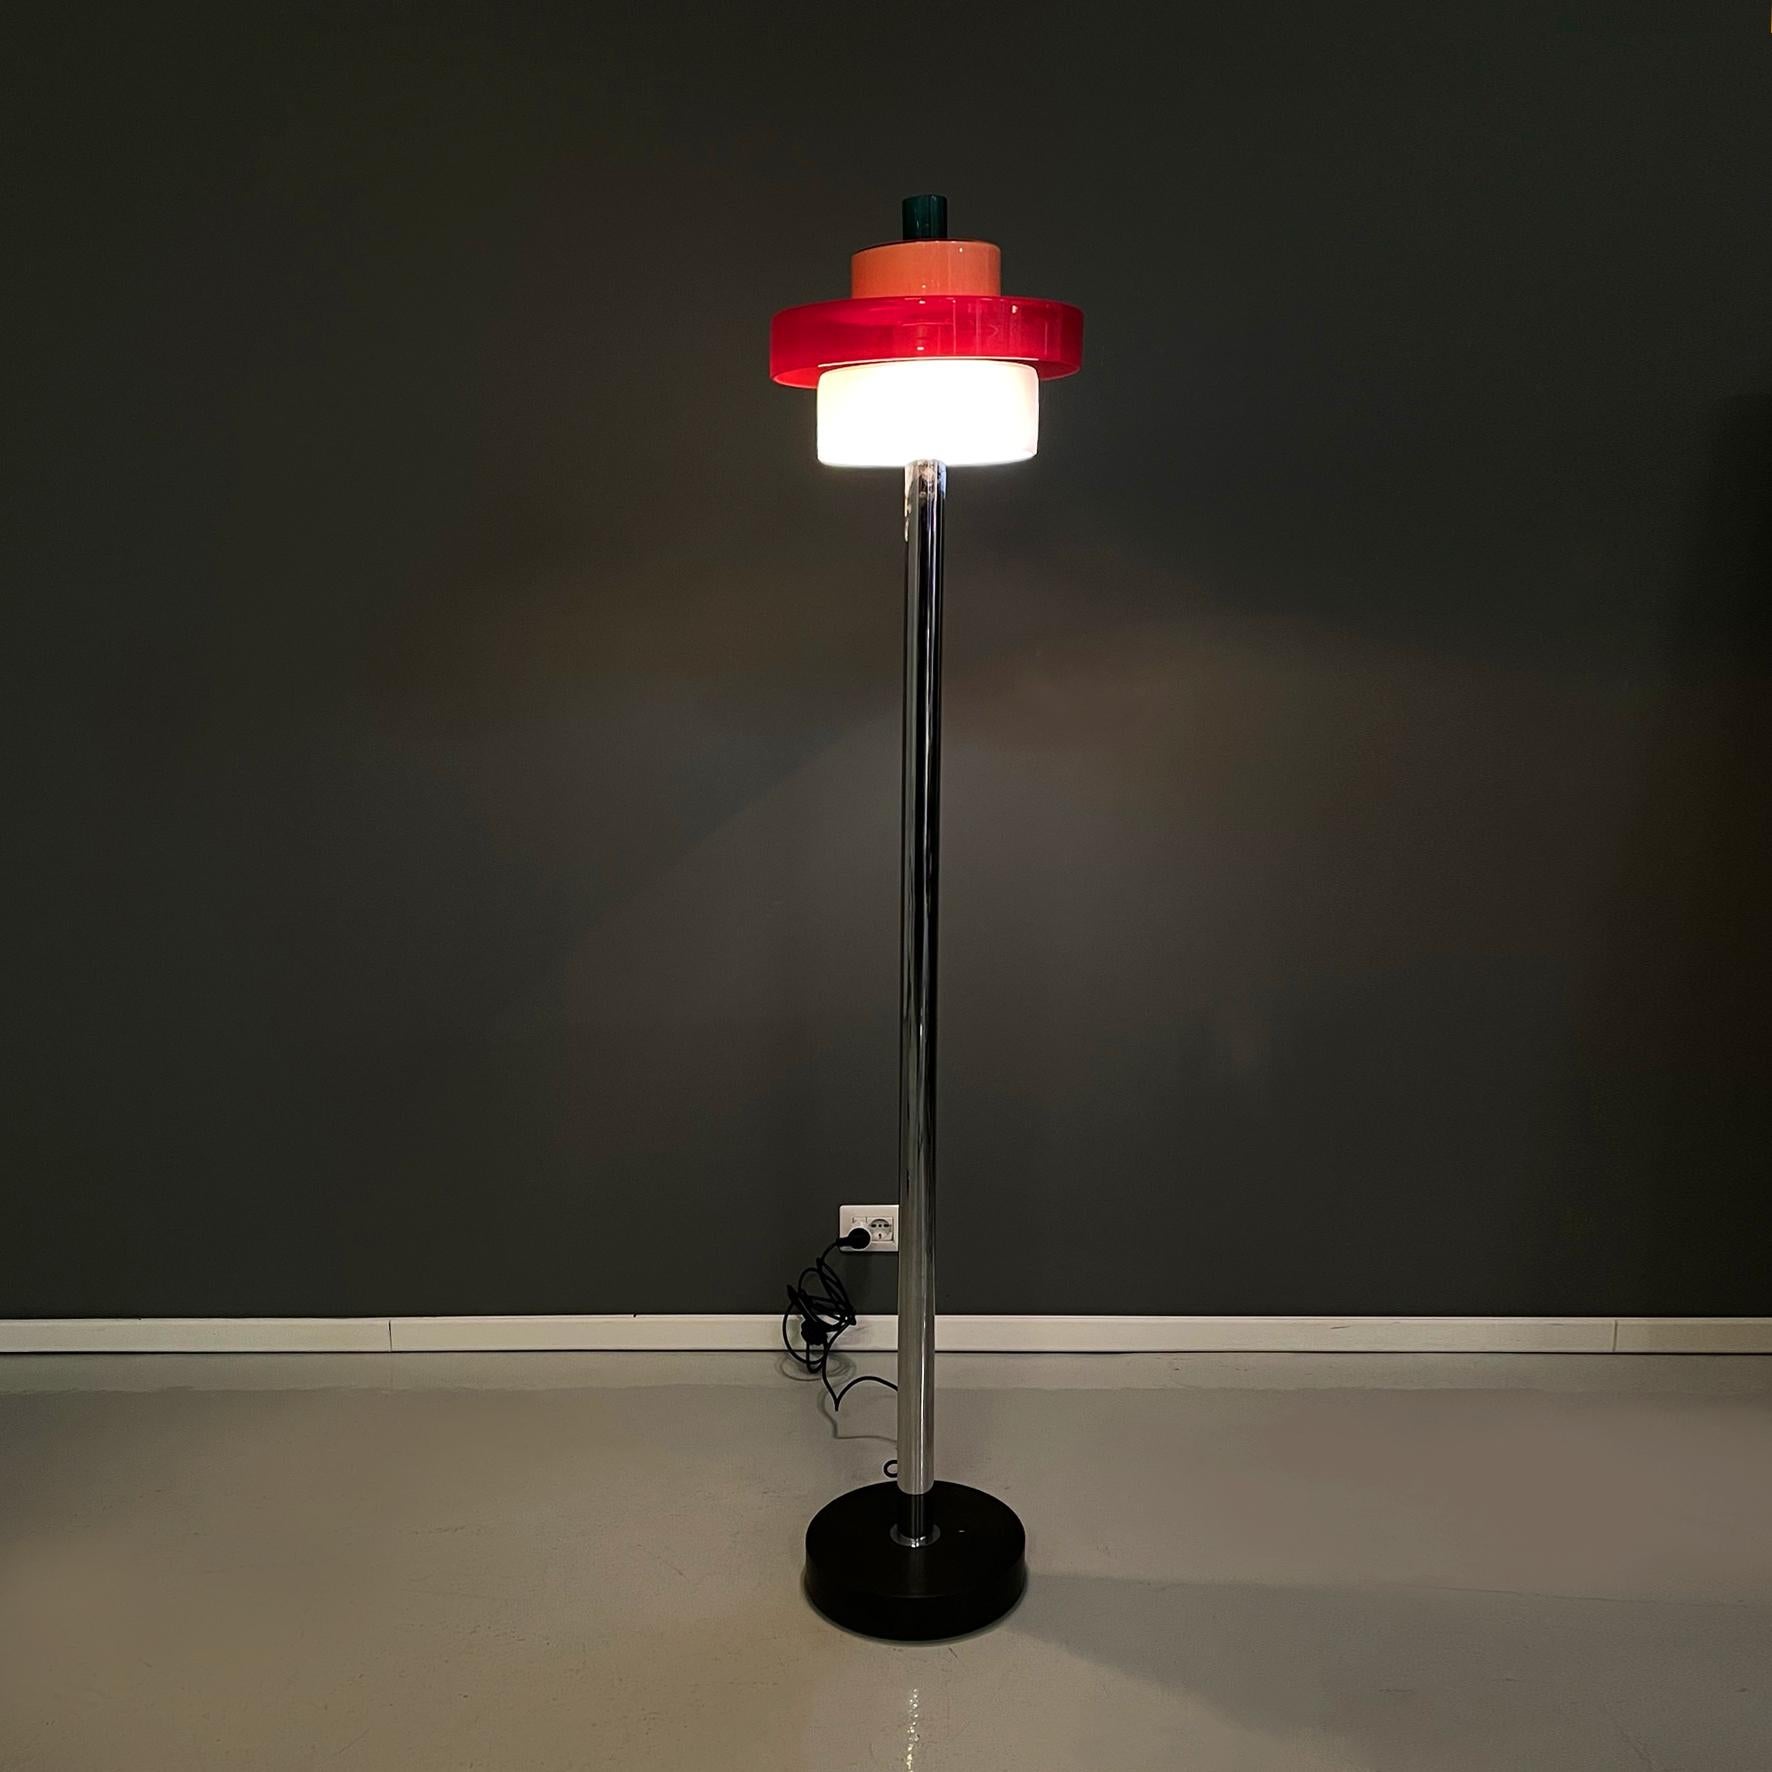 Italian modern Glass Floor lamp Allarnisam by Ettore Sottsass for Venini, 1990s
Floor lamp mod. Allarnisam with diffuser composed of 4 cylinders of different sizes, stacked on top of each other, in green, yellow, red and white colored glasses. The